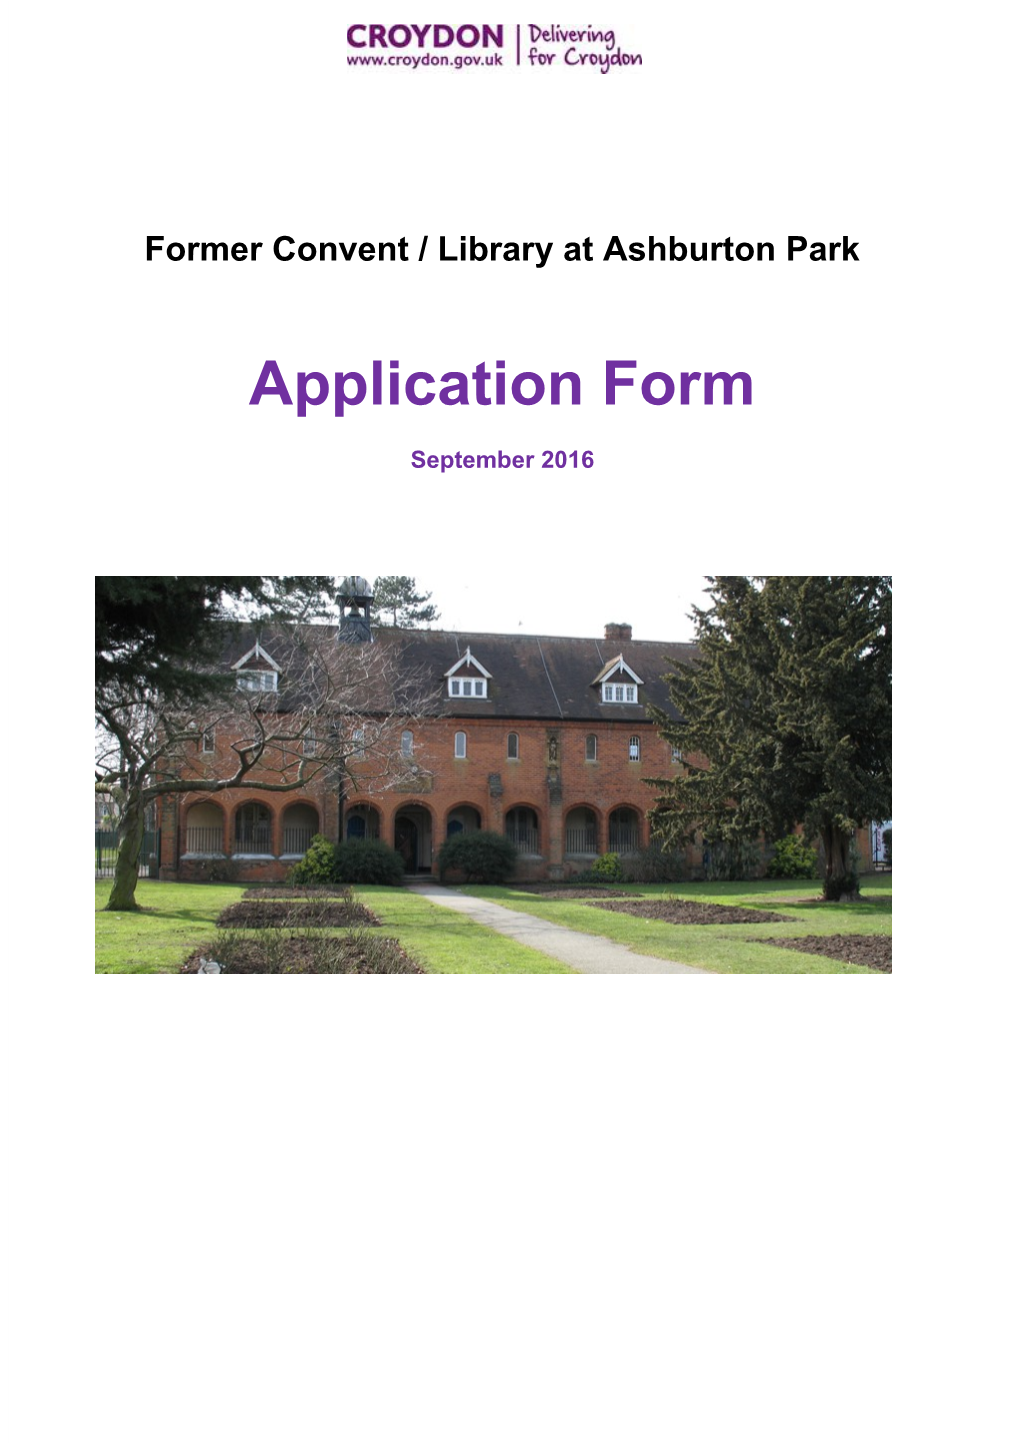 Application Form Former Convent-Library